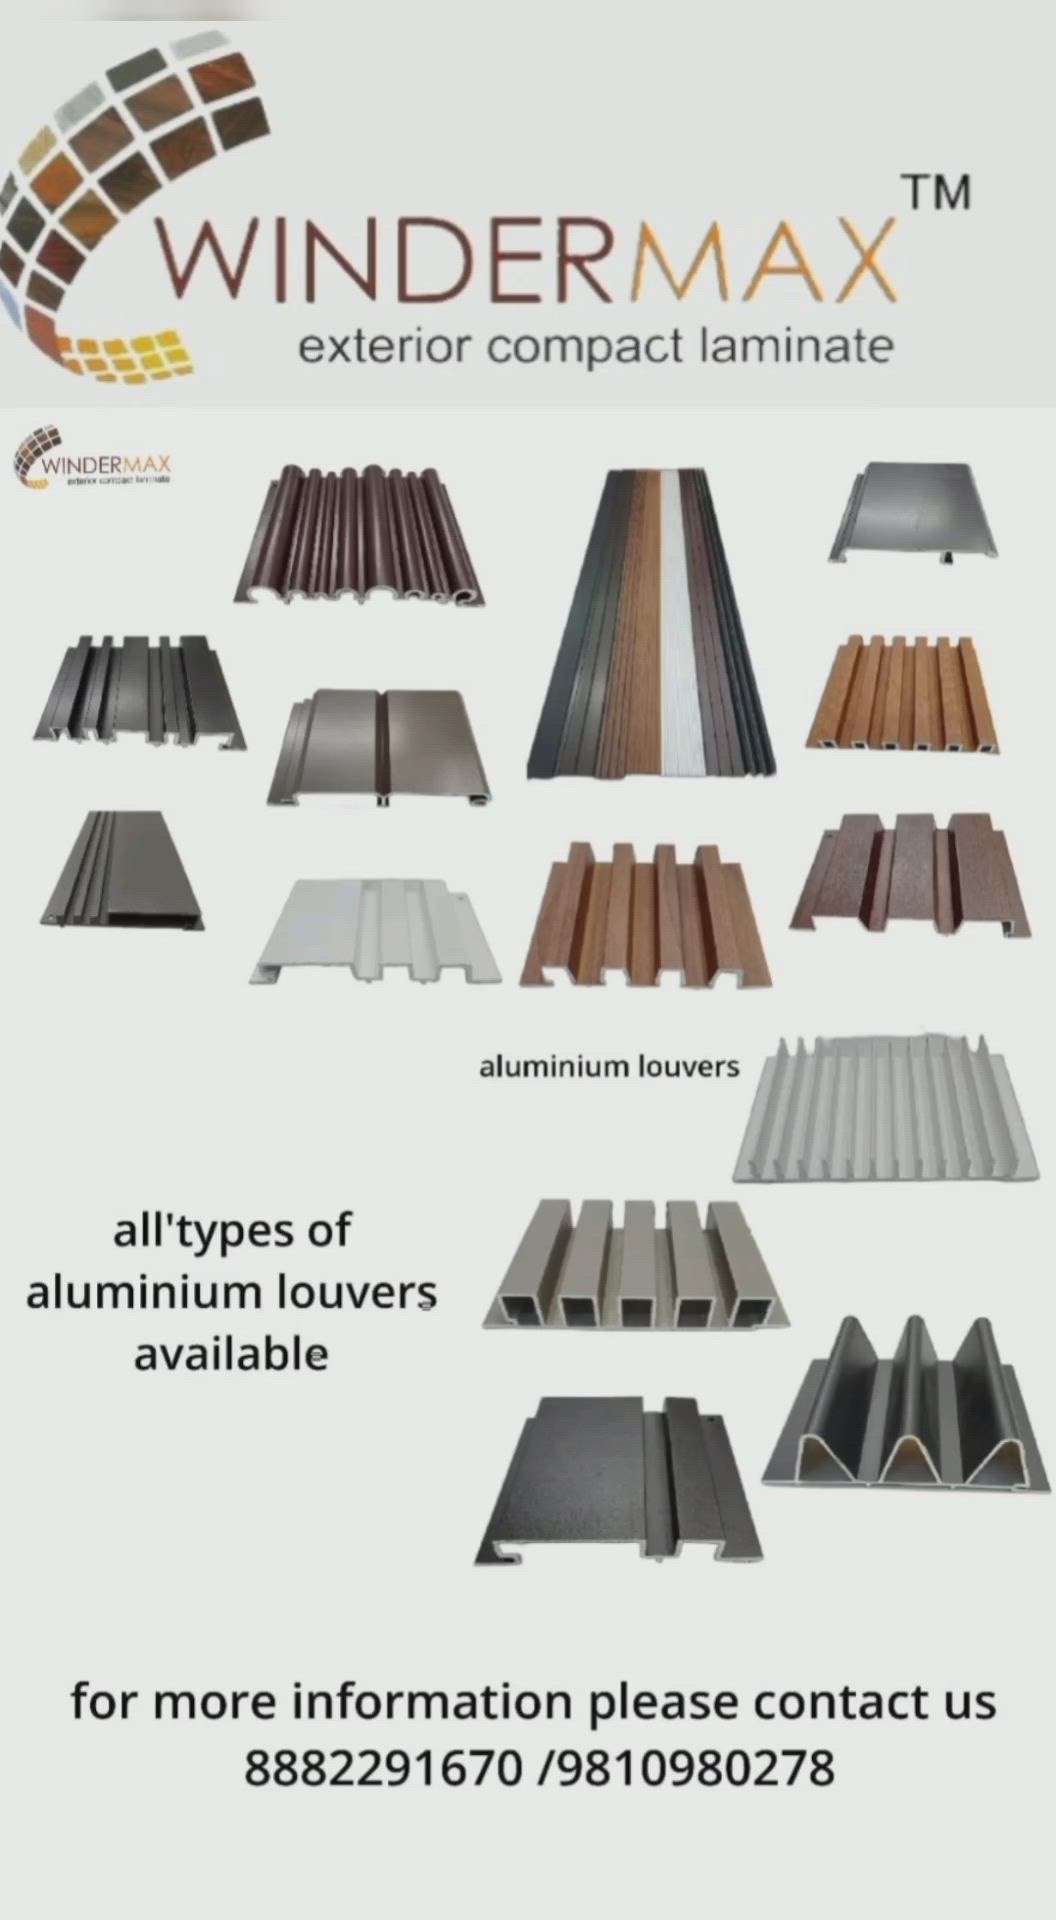 Windermax India Aluminium Louvers Site
.
.
#aluminiumlouvers #aluminium #Exterior #elevation #exteriorelevation #Frontelevation #modernexterior #Construction #Home #Decor #louvers #interior #aluminiumfin #fins
.
.
For more details our all products please visit websites
www.windermaxindia.com
www.indianmake.co.in 
Info@windermaxindia.com
or call us on 
8882291670 9810980278

Regards
Windermax India